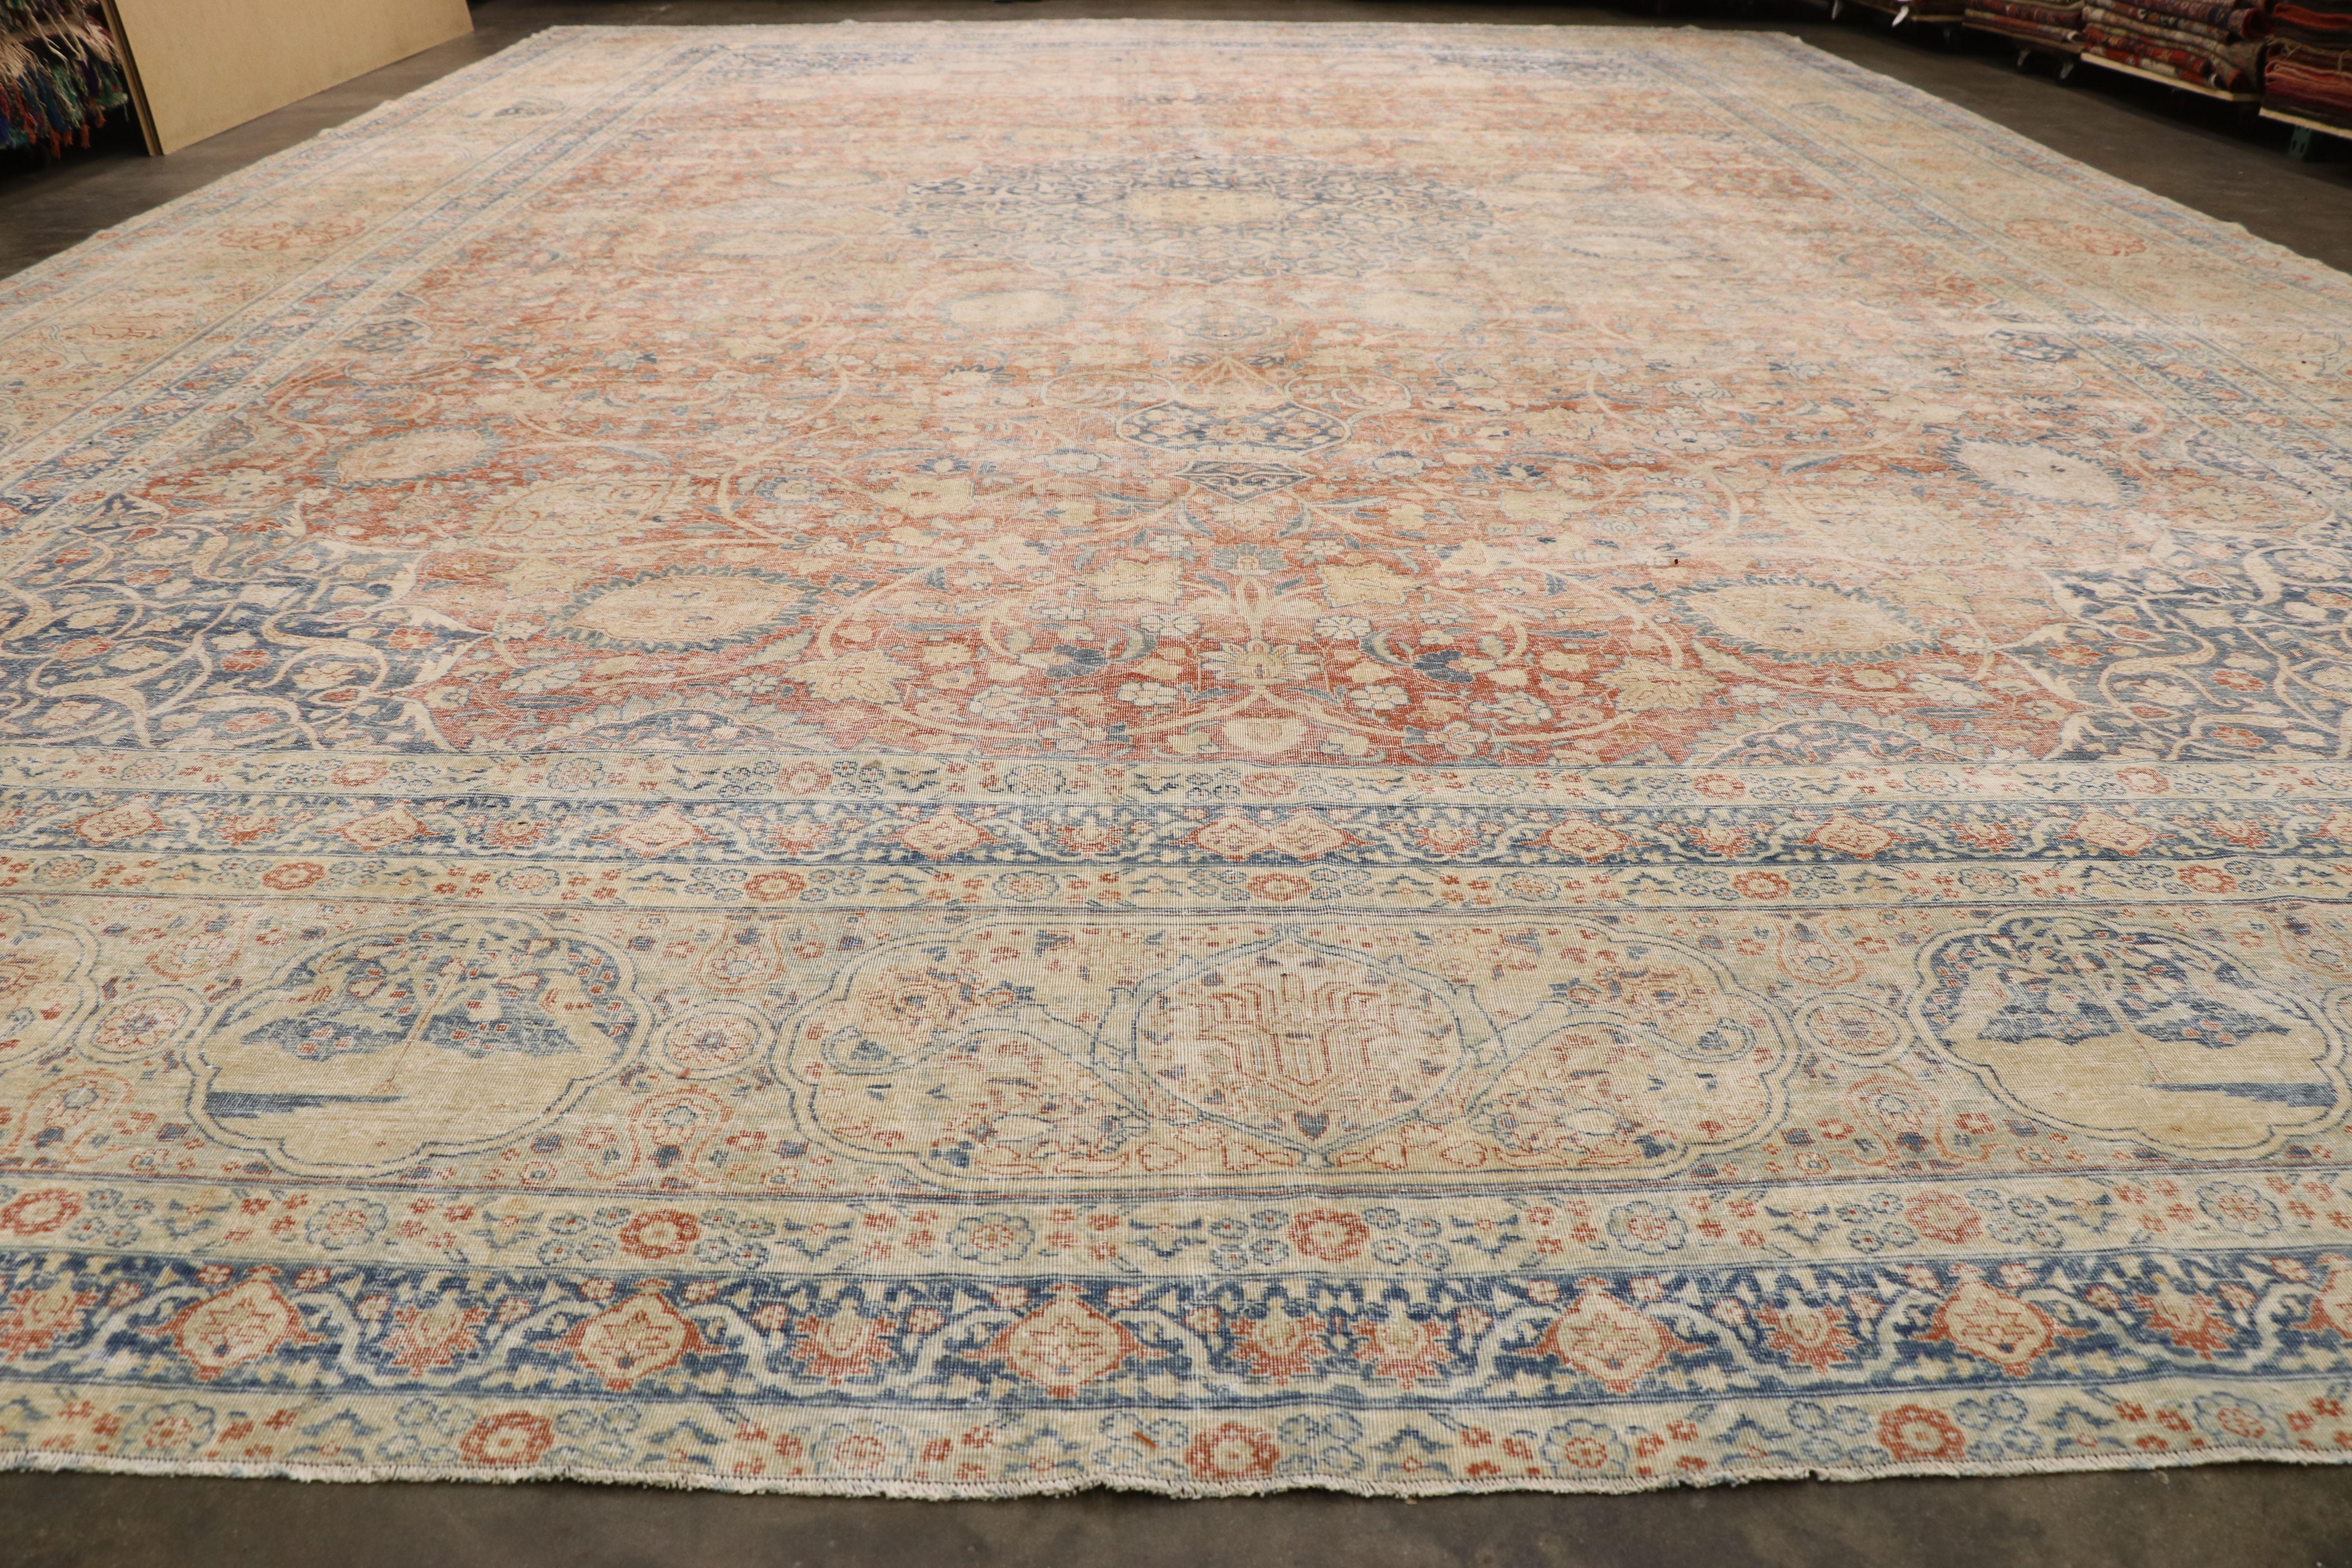 Distressed Antique Persian Tabriz Palace Rug with Rustic Relaxed Federal Style 1